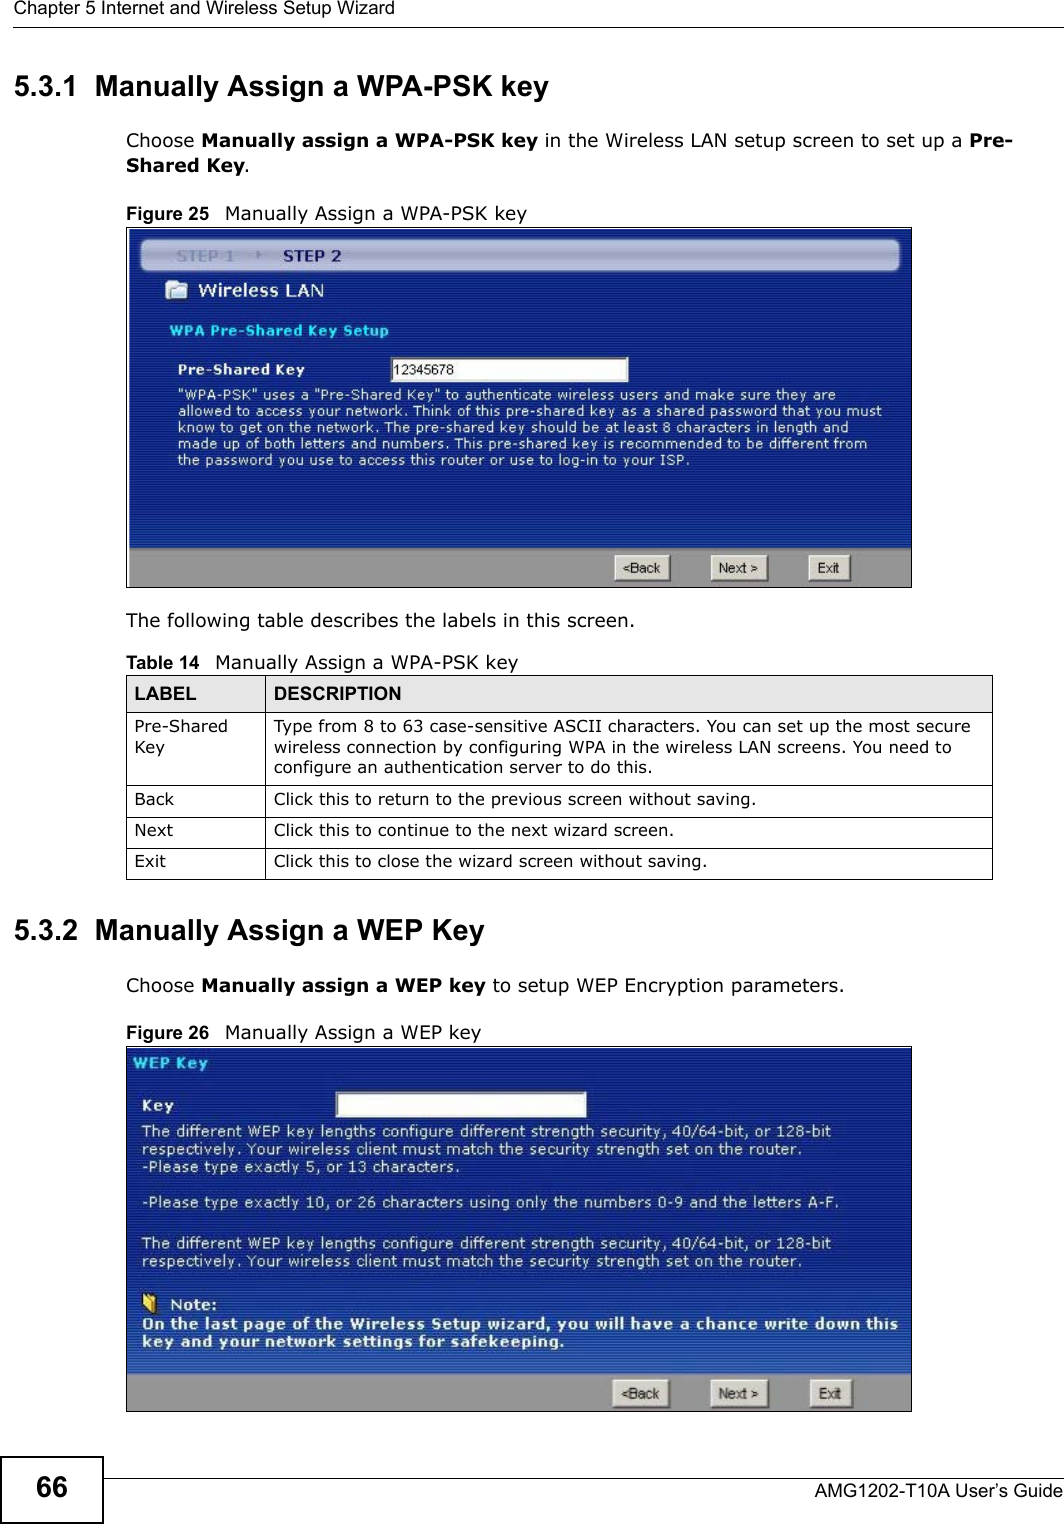 Chapter 5 Internet and Wireless Setup WizardAMG1202-T10A User’s Guide665.3.1  Manually Assign a WPA-PSK keyChoose Manually assign a WPA-PSK key in the Wireless LAN setup screen to set up a Pre-Shared Key.Figure 25   Manually Assign a WPA-PSK keyThe following table describes the labels in this screen. 5.3.2  Manually Assign a WEP KeyChoose Manually assign a WEP key to setup WEP Encryption parameters.Figure 26   Manually Assign a WEP keyTable 14   Manually Assign a WPA-PSK keyLABEL DESCRIPTIONPre-Shared KeyType from 8 to 63 case-sensitive ASCII characters. You can set up the most secure wireless connection by configuring WPA in the wireless LAN screens. You need to configure an authentication server to do this.Back Click this to return to the previous screen without saving.Next Click this to continue to the next wizard screen.Exit Click this to close the wizard screen without saving.